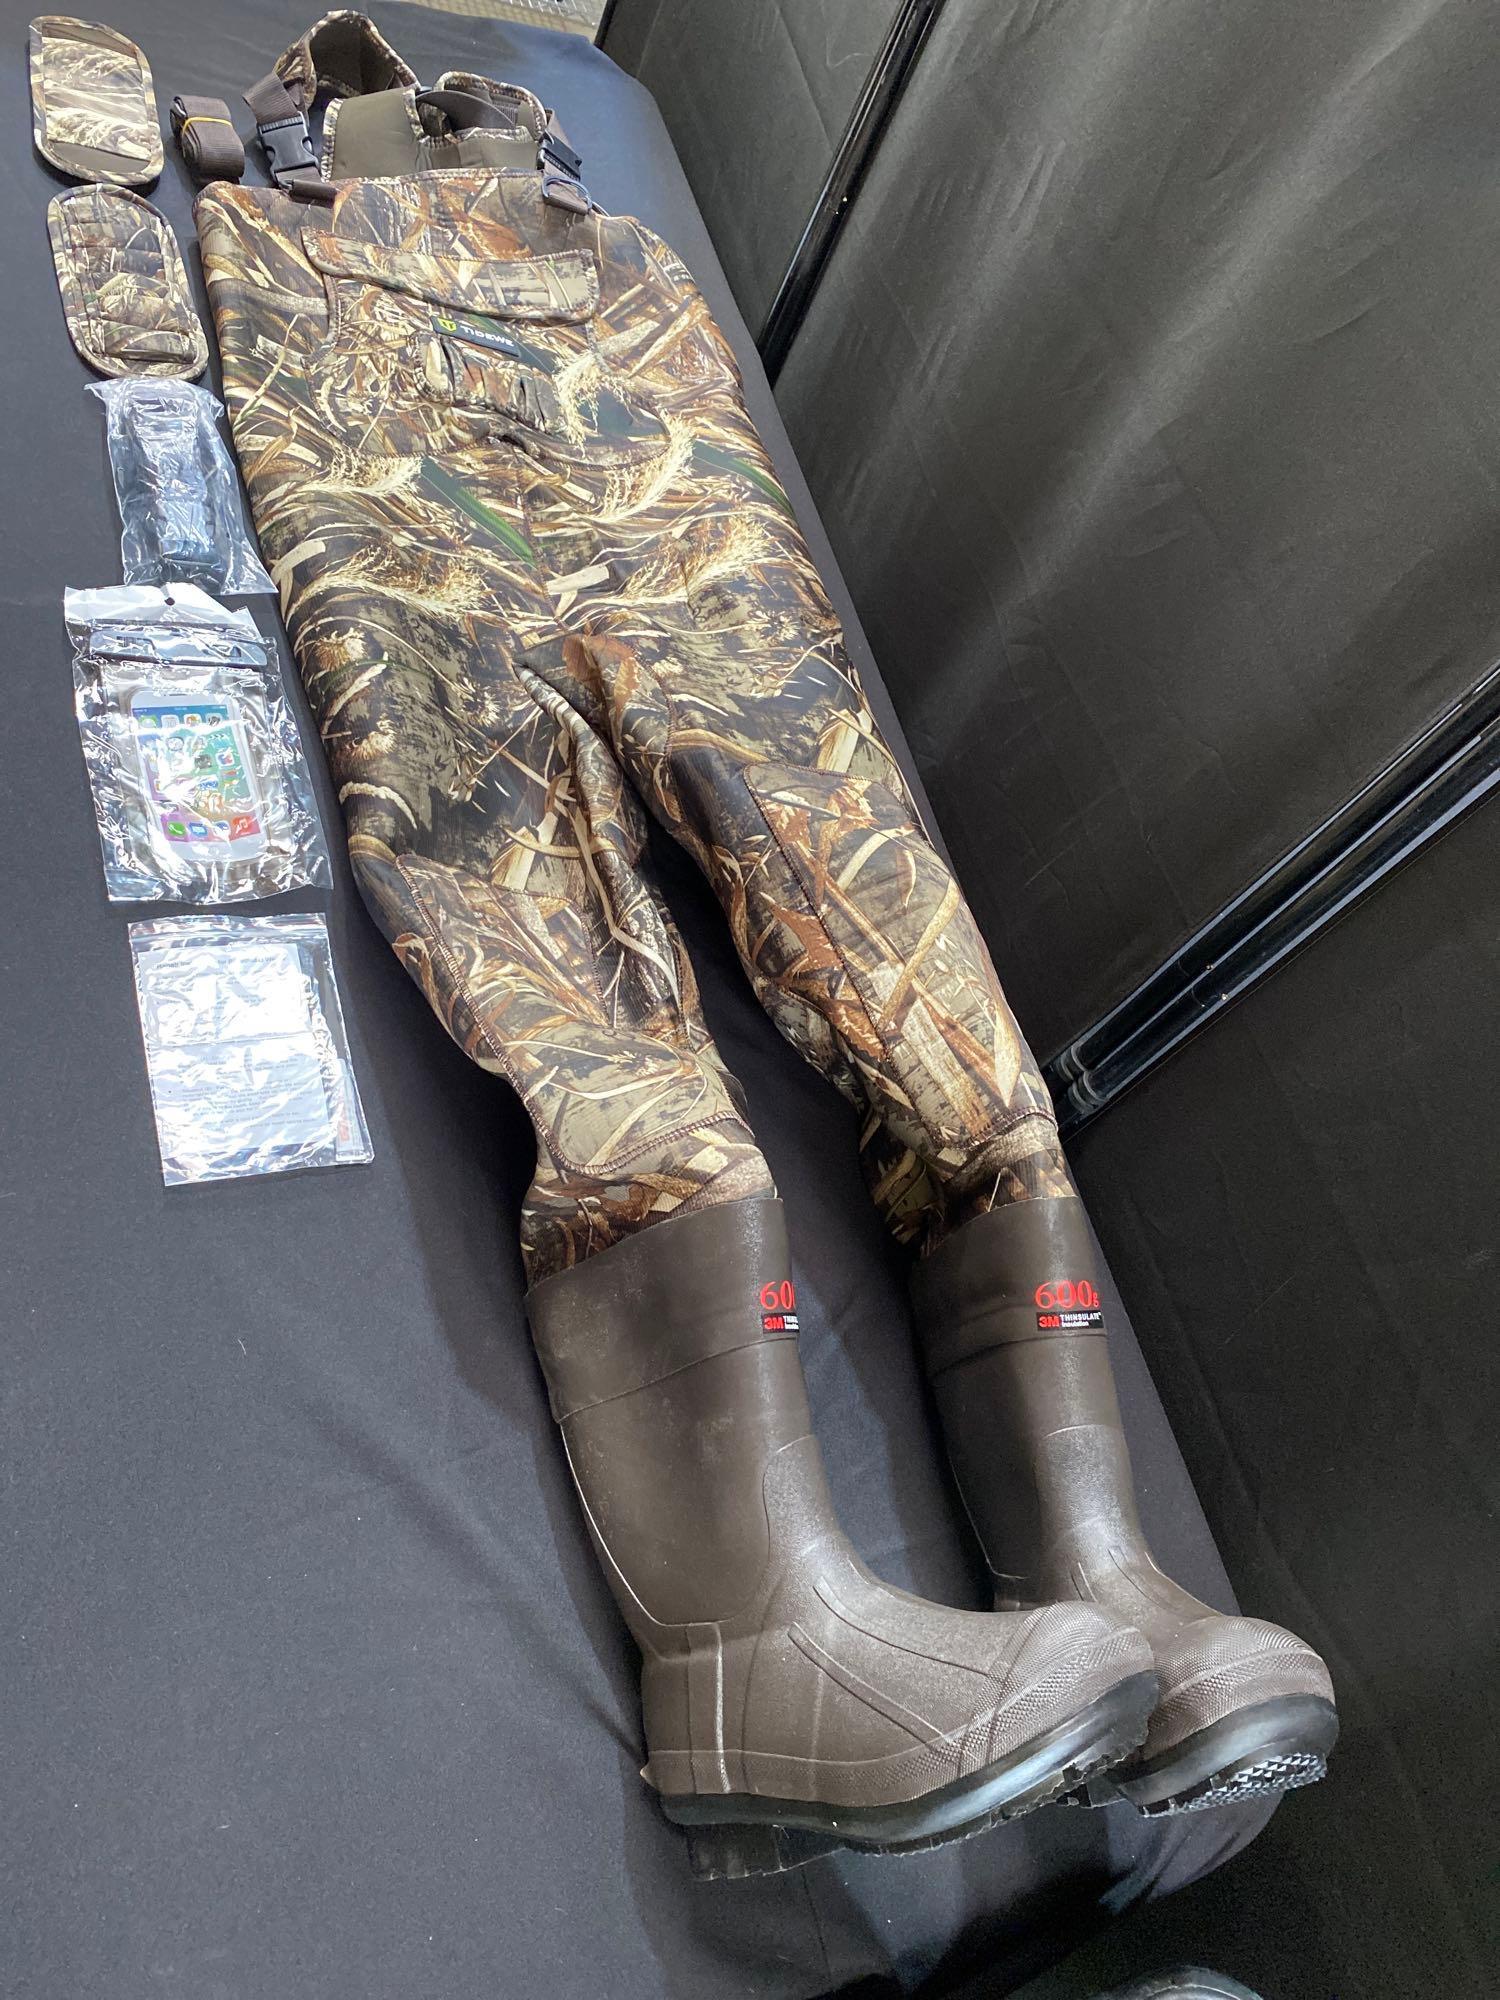 TIDEWE Hunting Waders with Boot Hanger & 600G Insulation